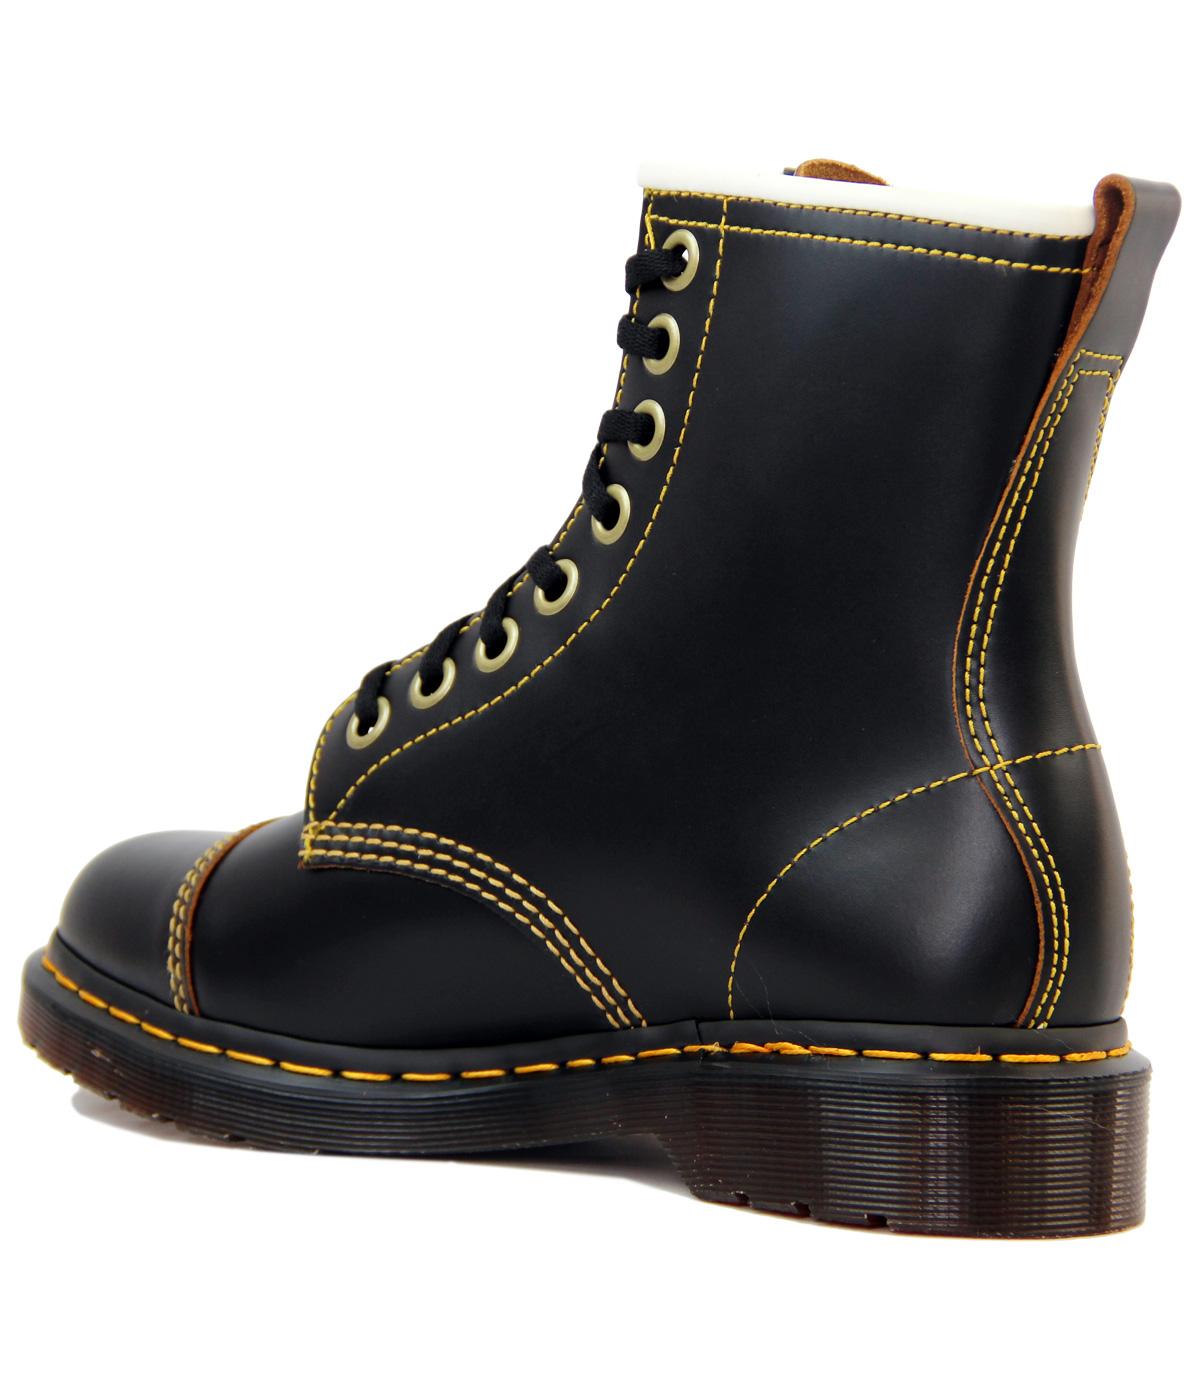 DR MARTENS Archive Philips Capper Mod Leather Boots in Black